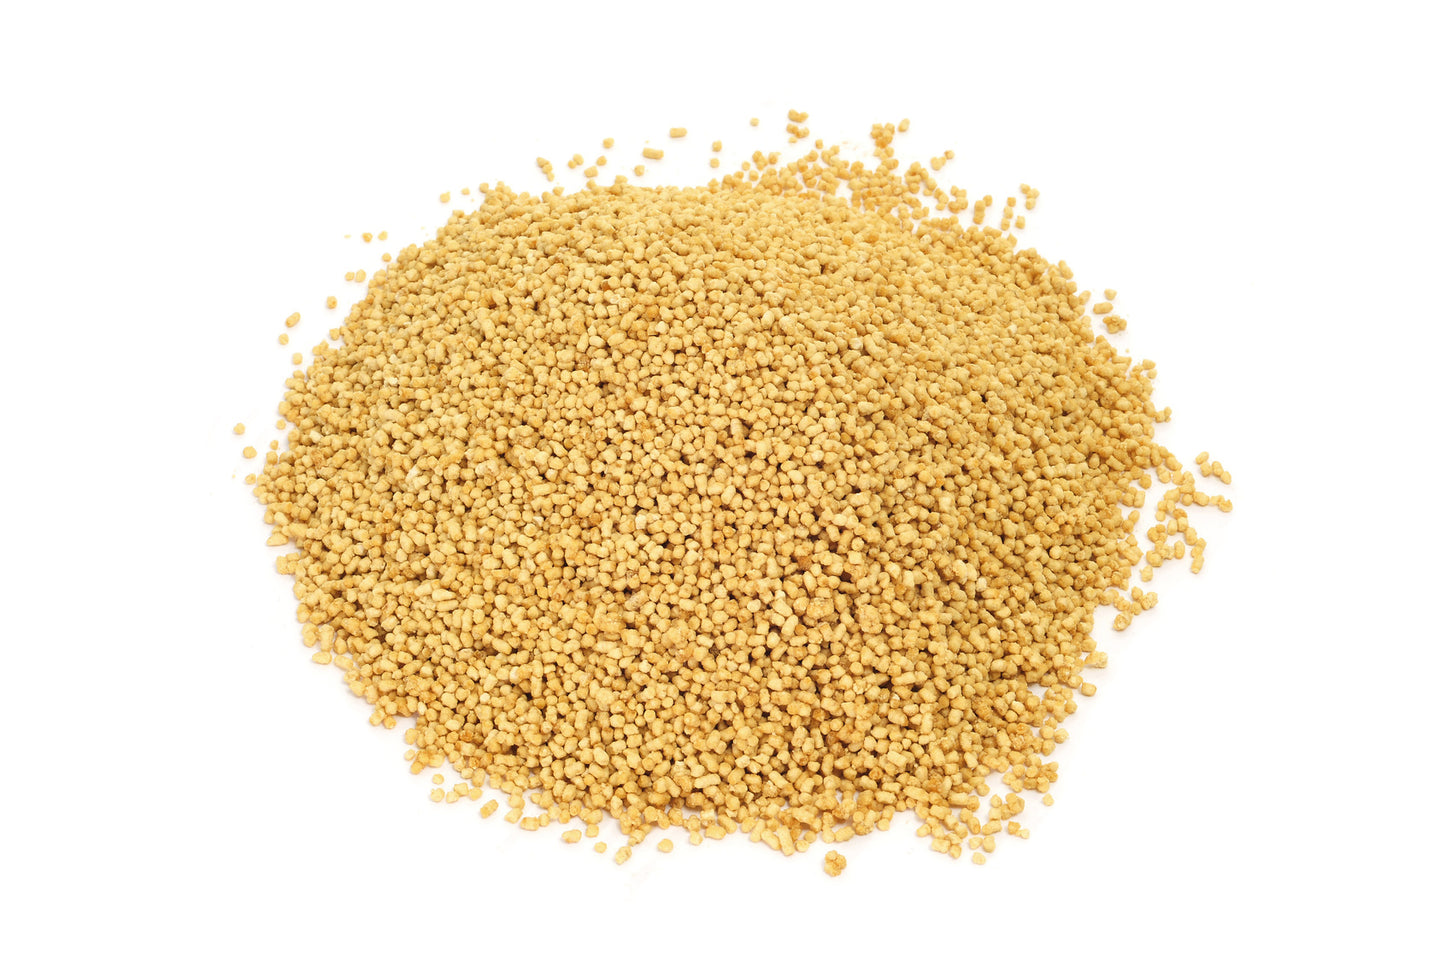 Sunflower Lecithin  NZ| Premium Lecithin made from Sunflower - Showing big heap of granules